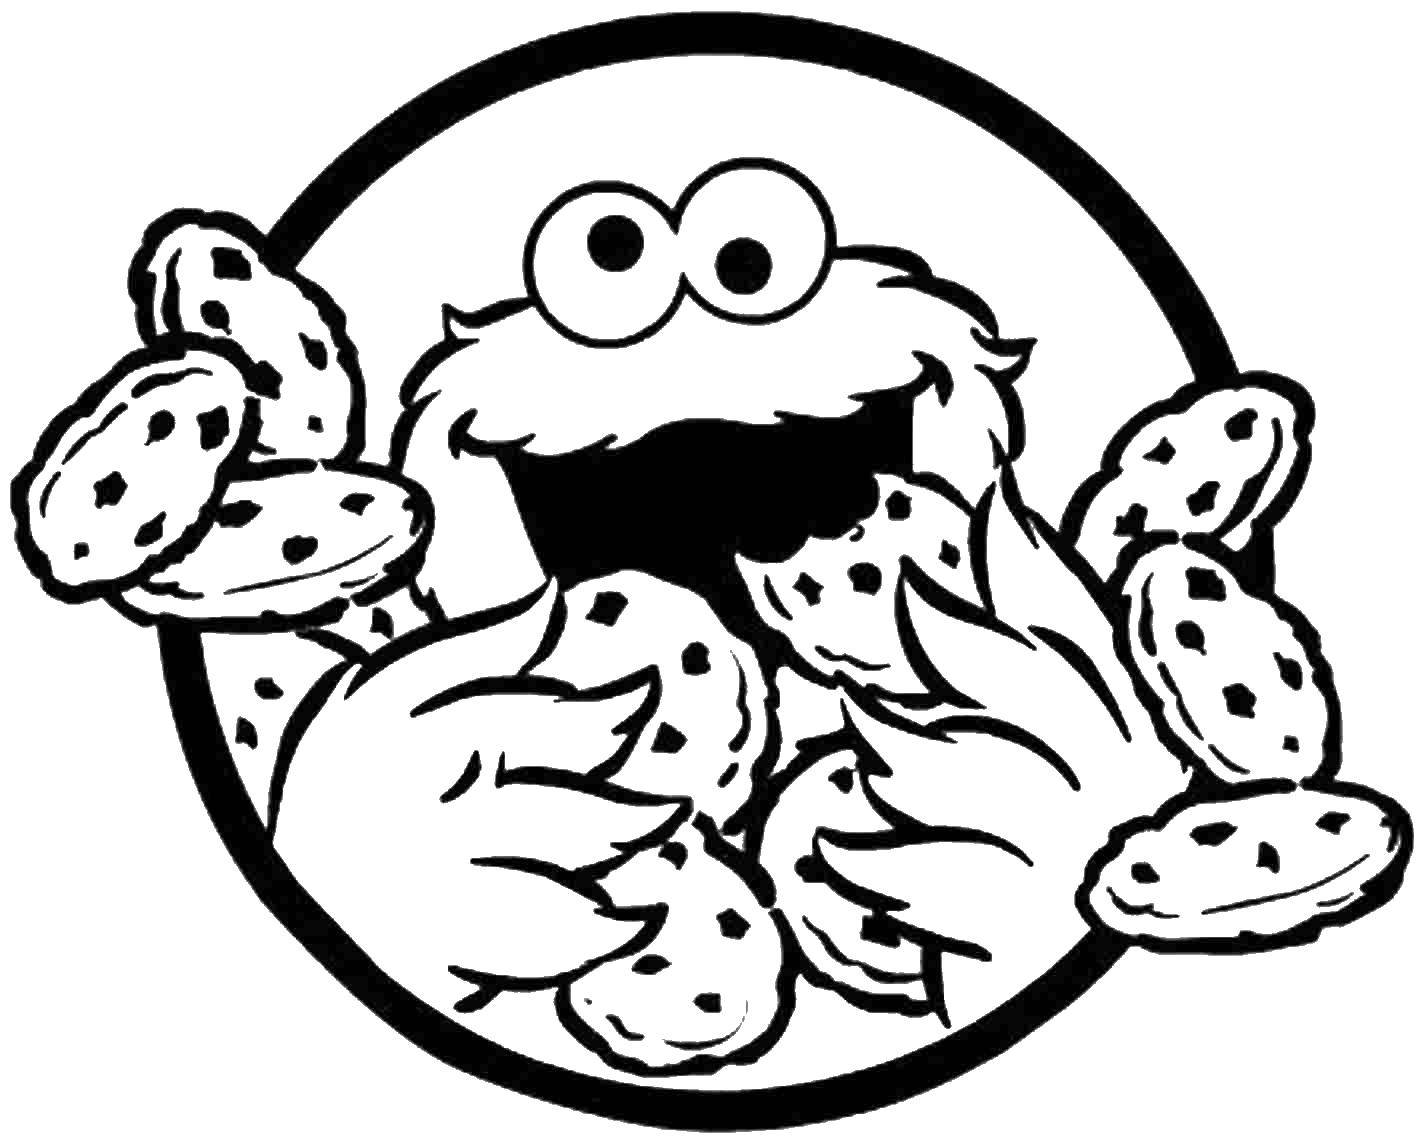 Coloring Monster eats cookies. Category Monsters. Tags:  monster, cookie.